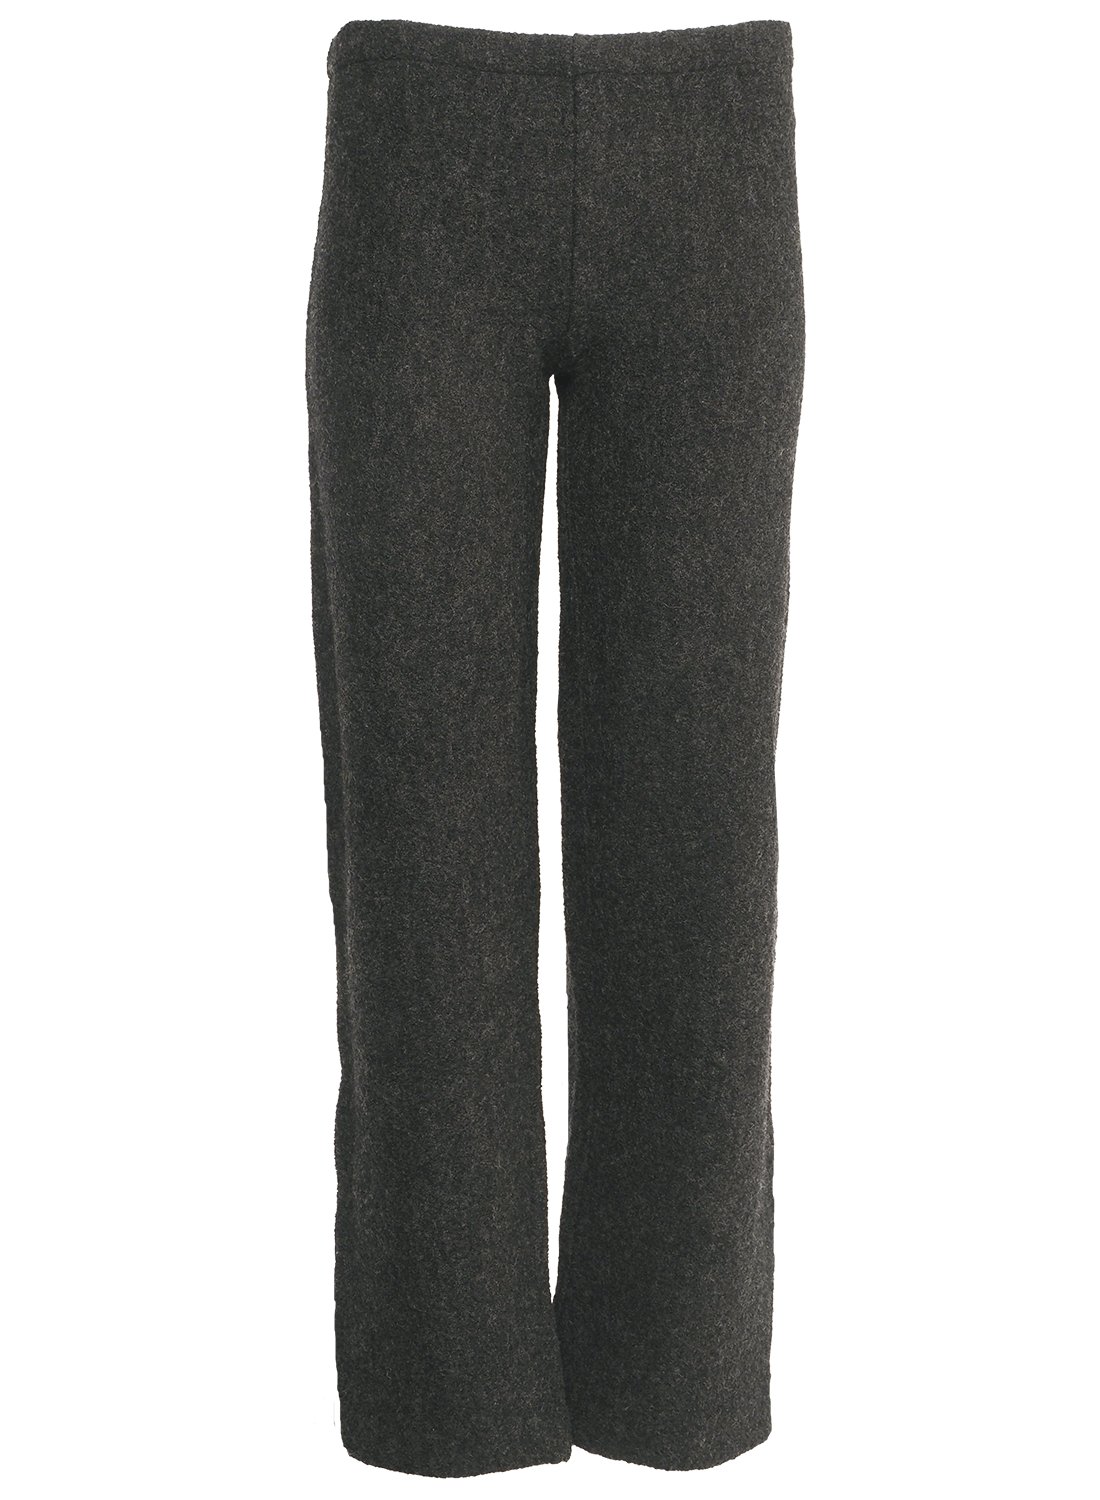 Reiff Women Pant, Crepe Knit Merino Wool – Warmth and Weather